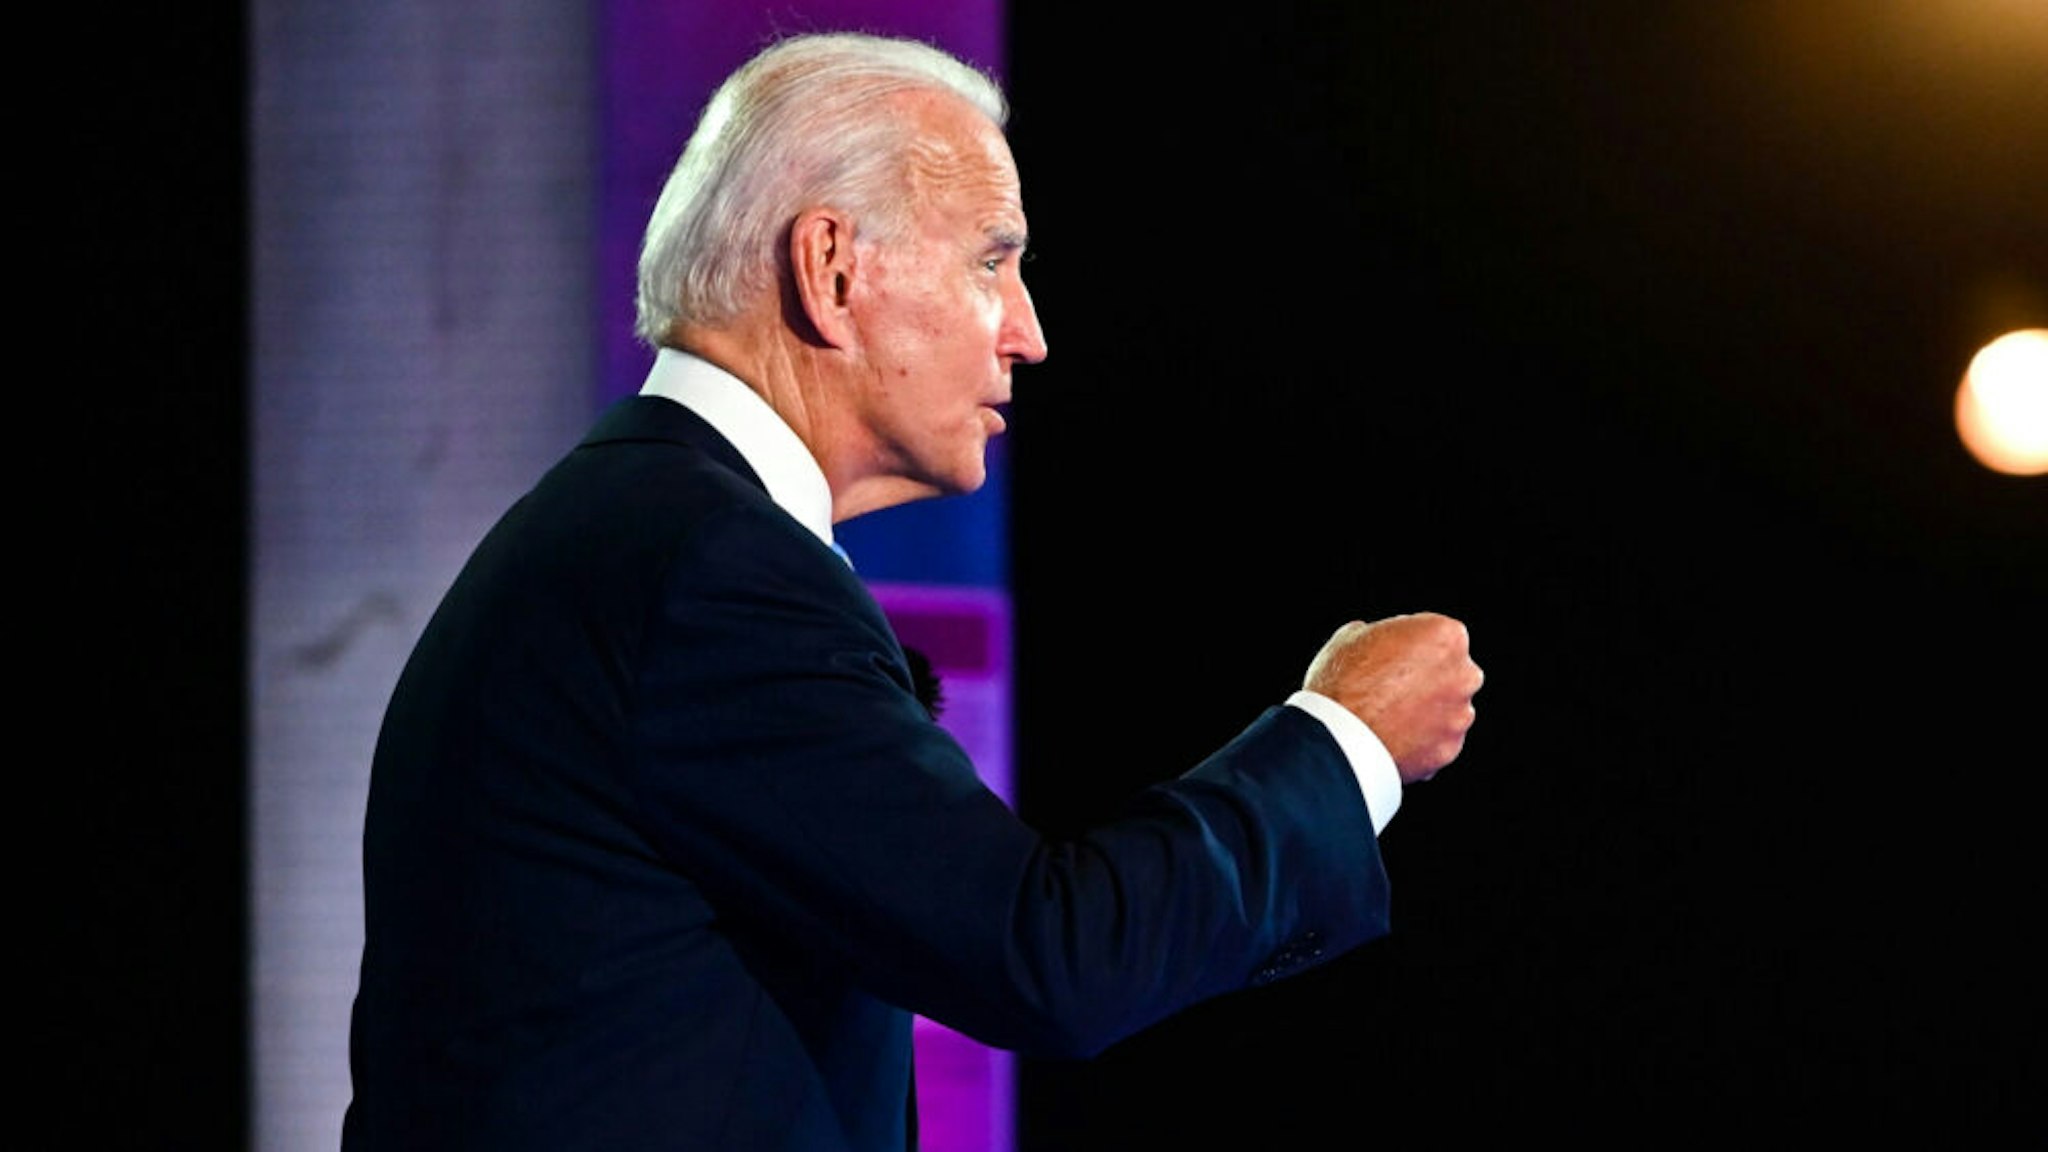 Democratic presidential nominee and former Vice President Joe Biden participates in an NBC Town Hall event at the Perez Art Museum in Miami, Florida on October 5, 2020.